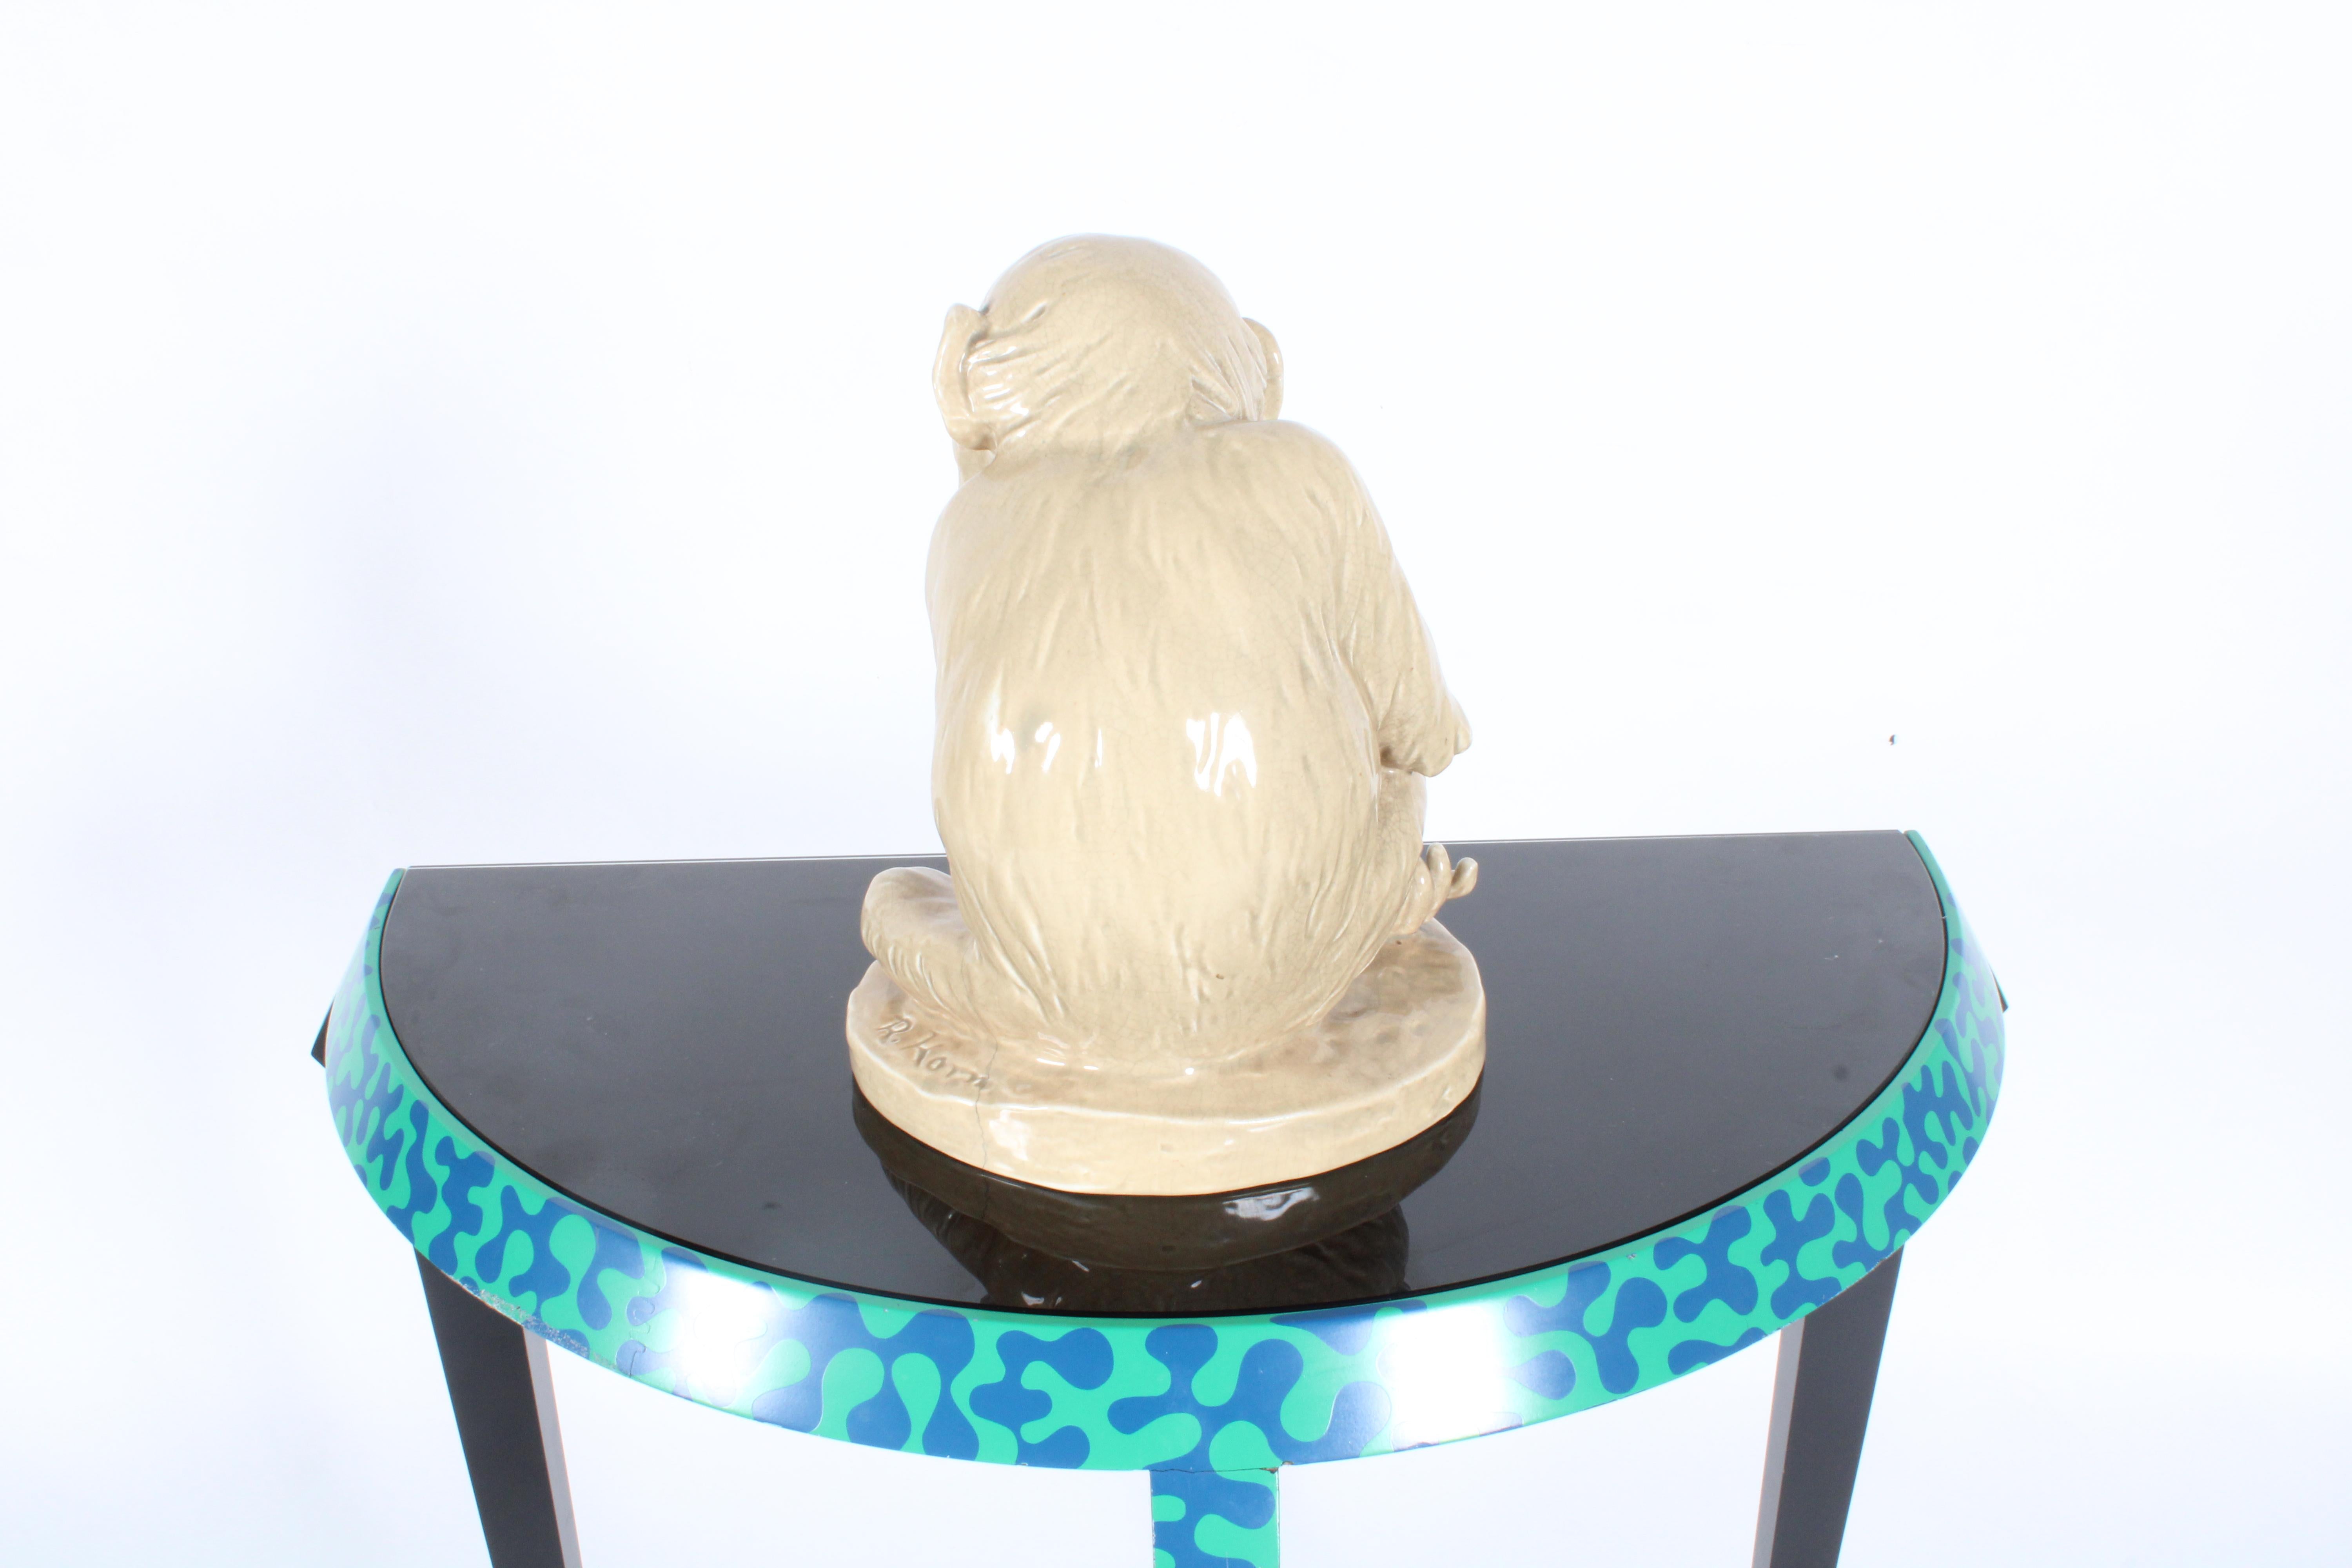 Charming Vintage Ceramic In The Form Of A Chimpanzee  *Free Worldwide Shipping 1